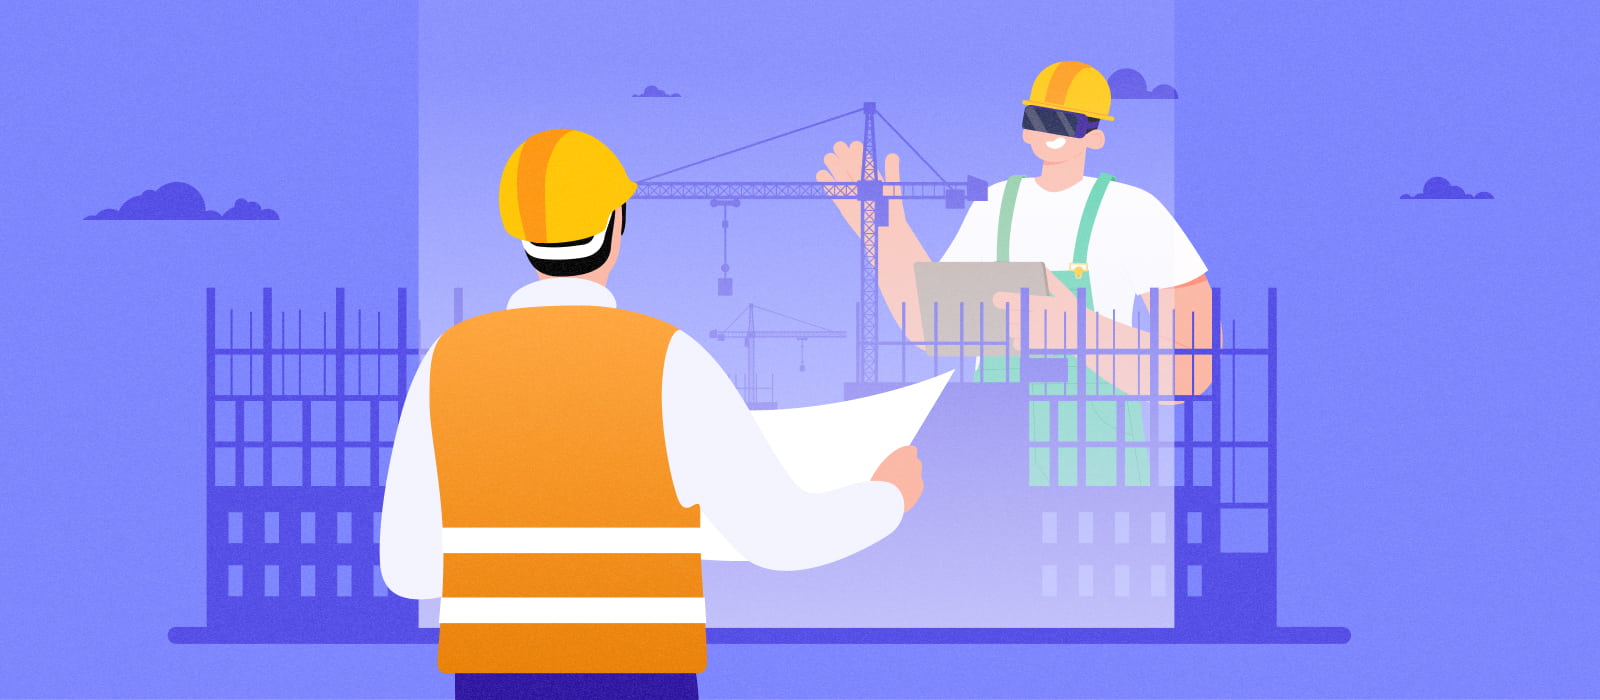 Application of AR/VR in the construction industry